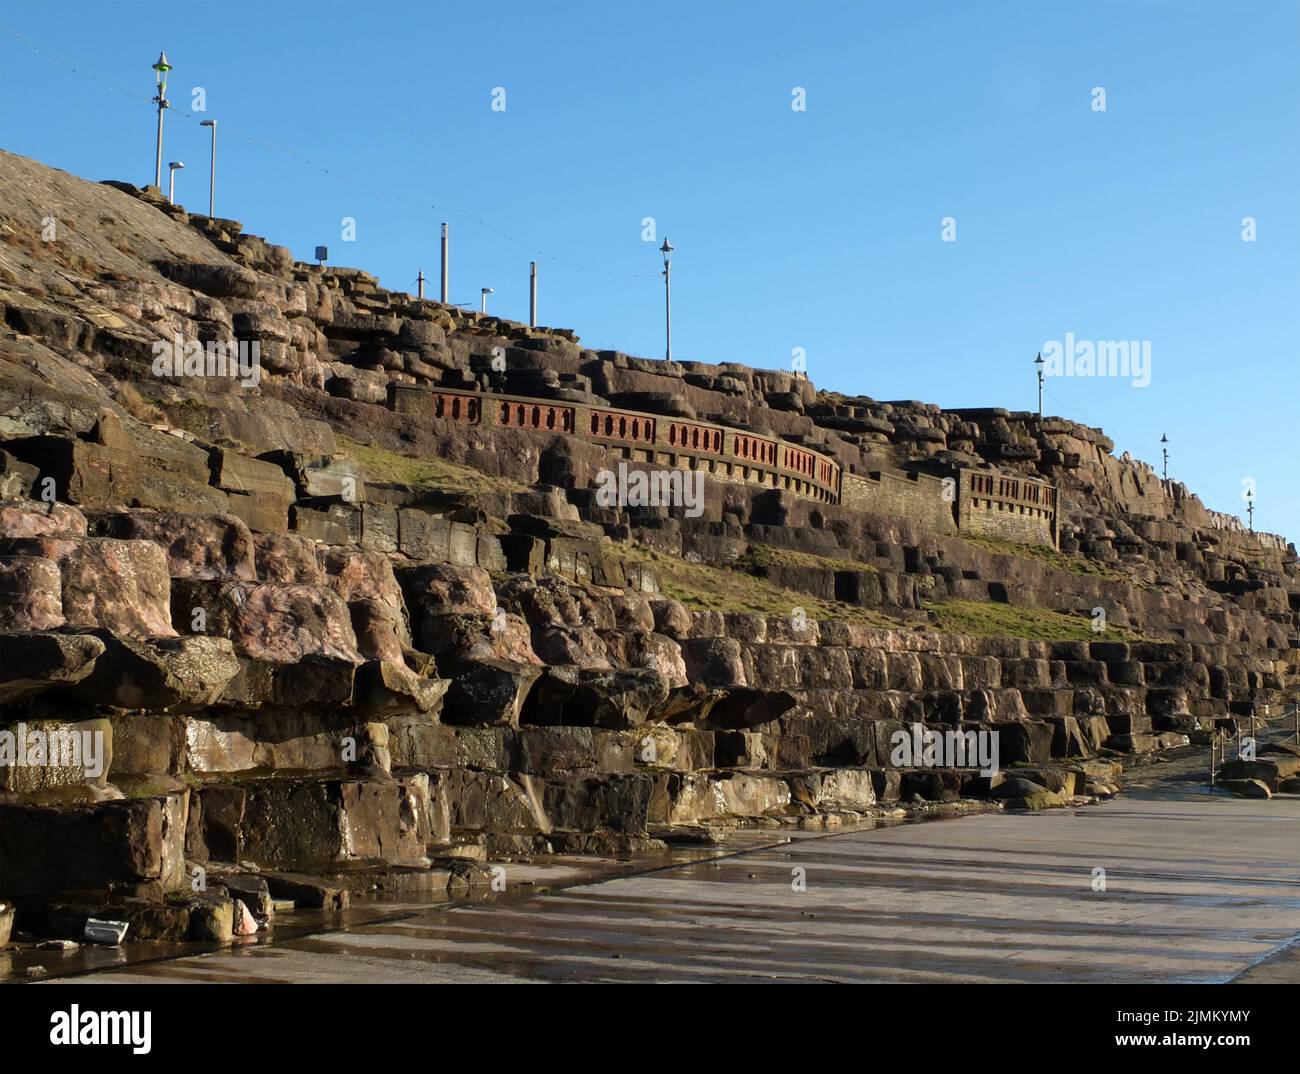 The cliffs area of blackpool with artificially sculpted rocks and walkways along the promenade in afternoon sunlight Stock Photo